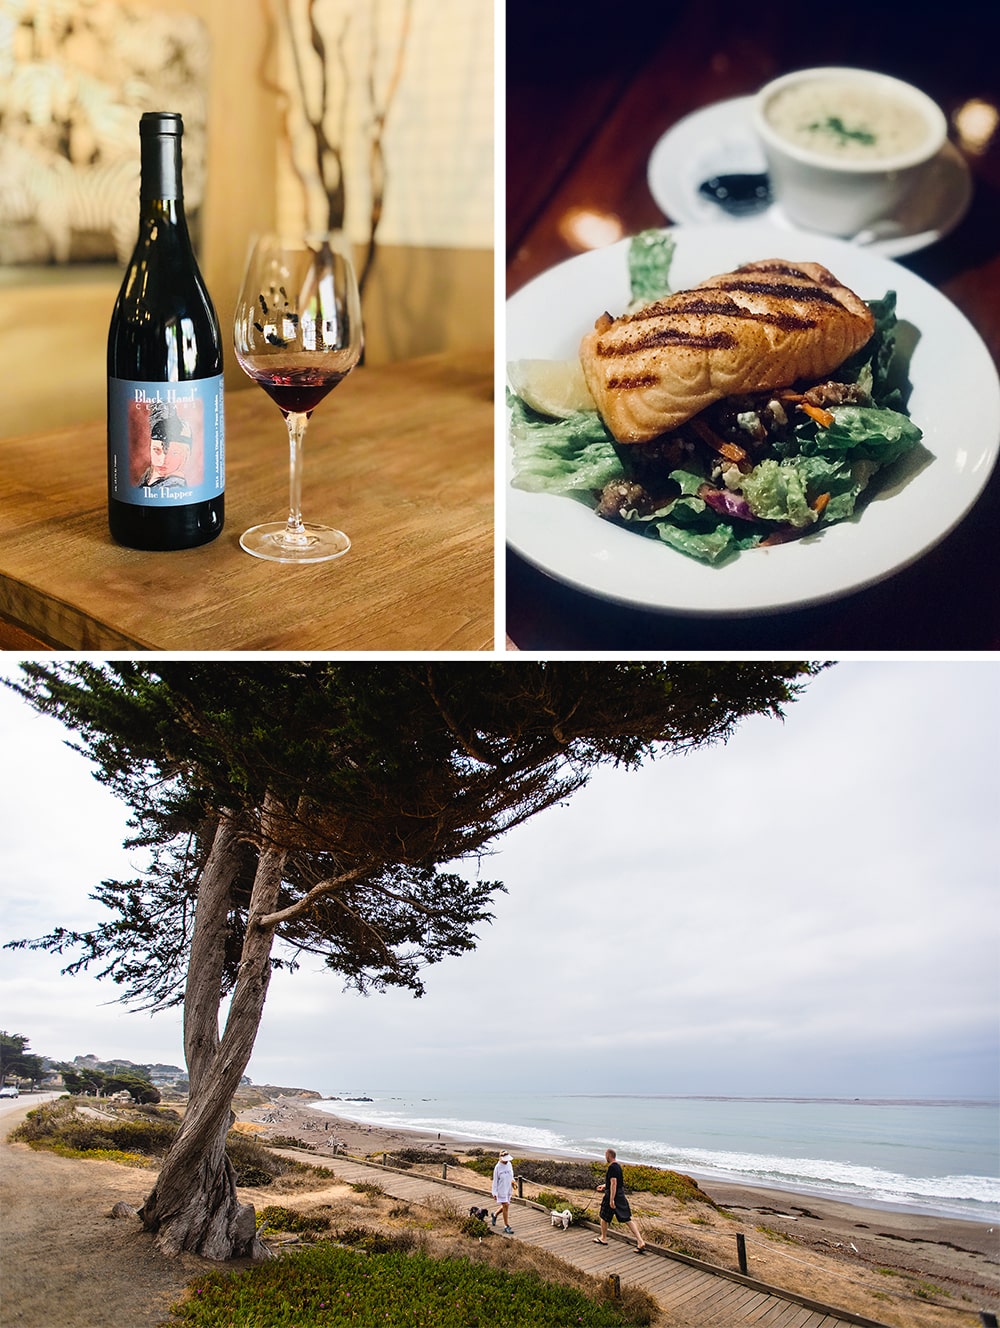 A glass of red wine, fresh seafood, and a stroll along the Pacific Ocean will make every trip memorable.